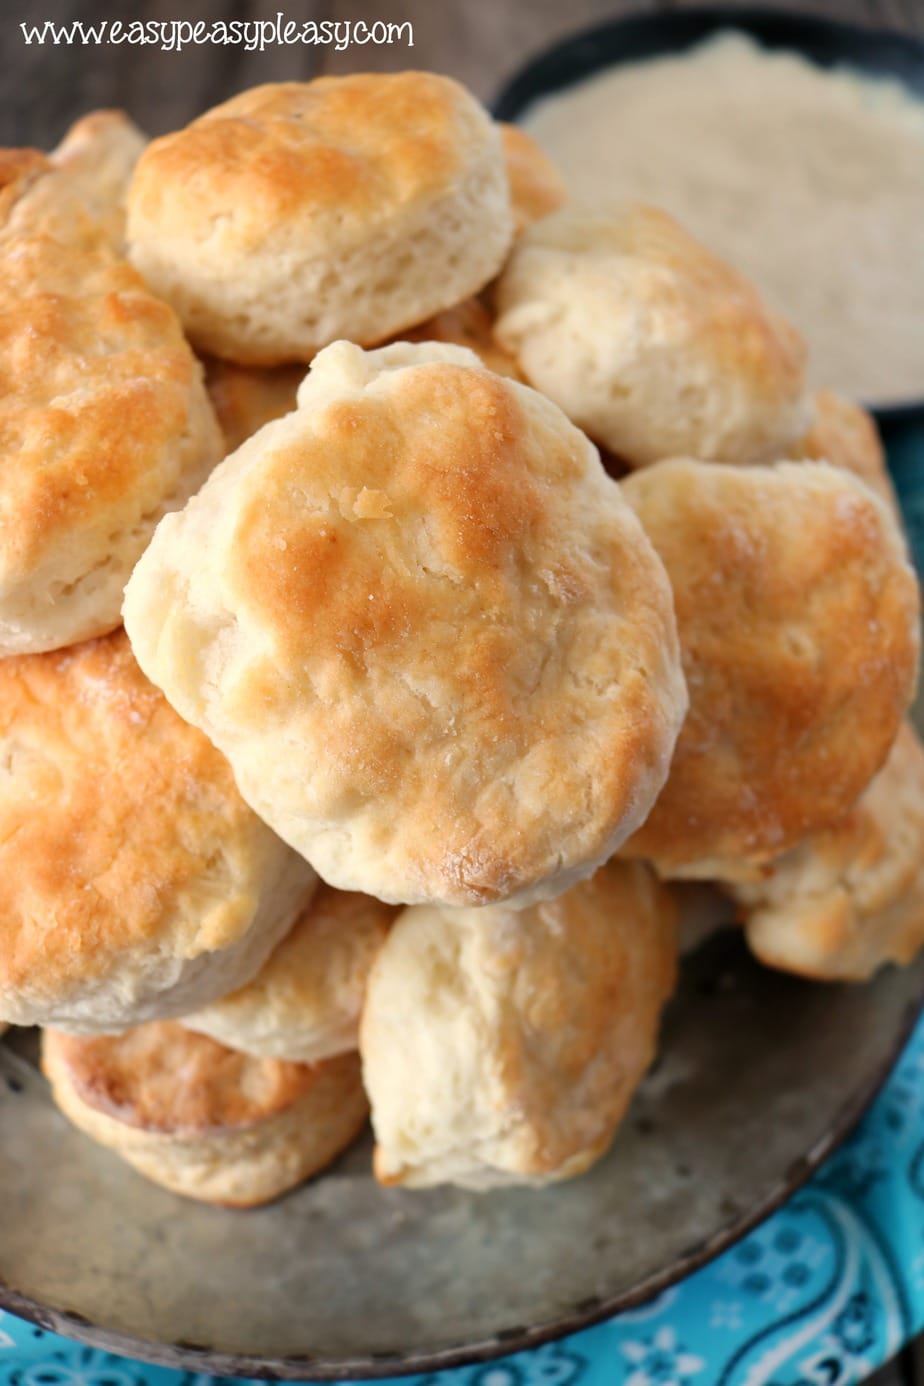 Homemade Biscuits Using Only 4 Ingredients - Easy Peasy Pleasy
